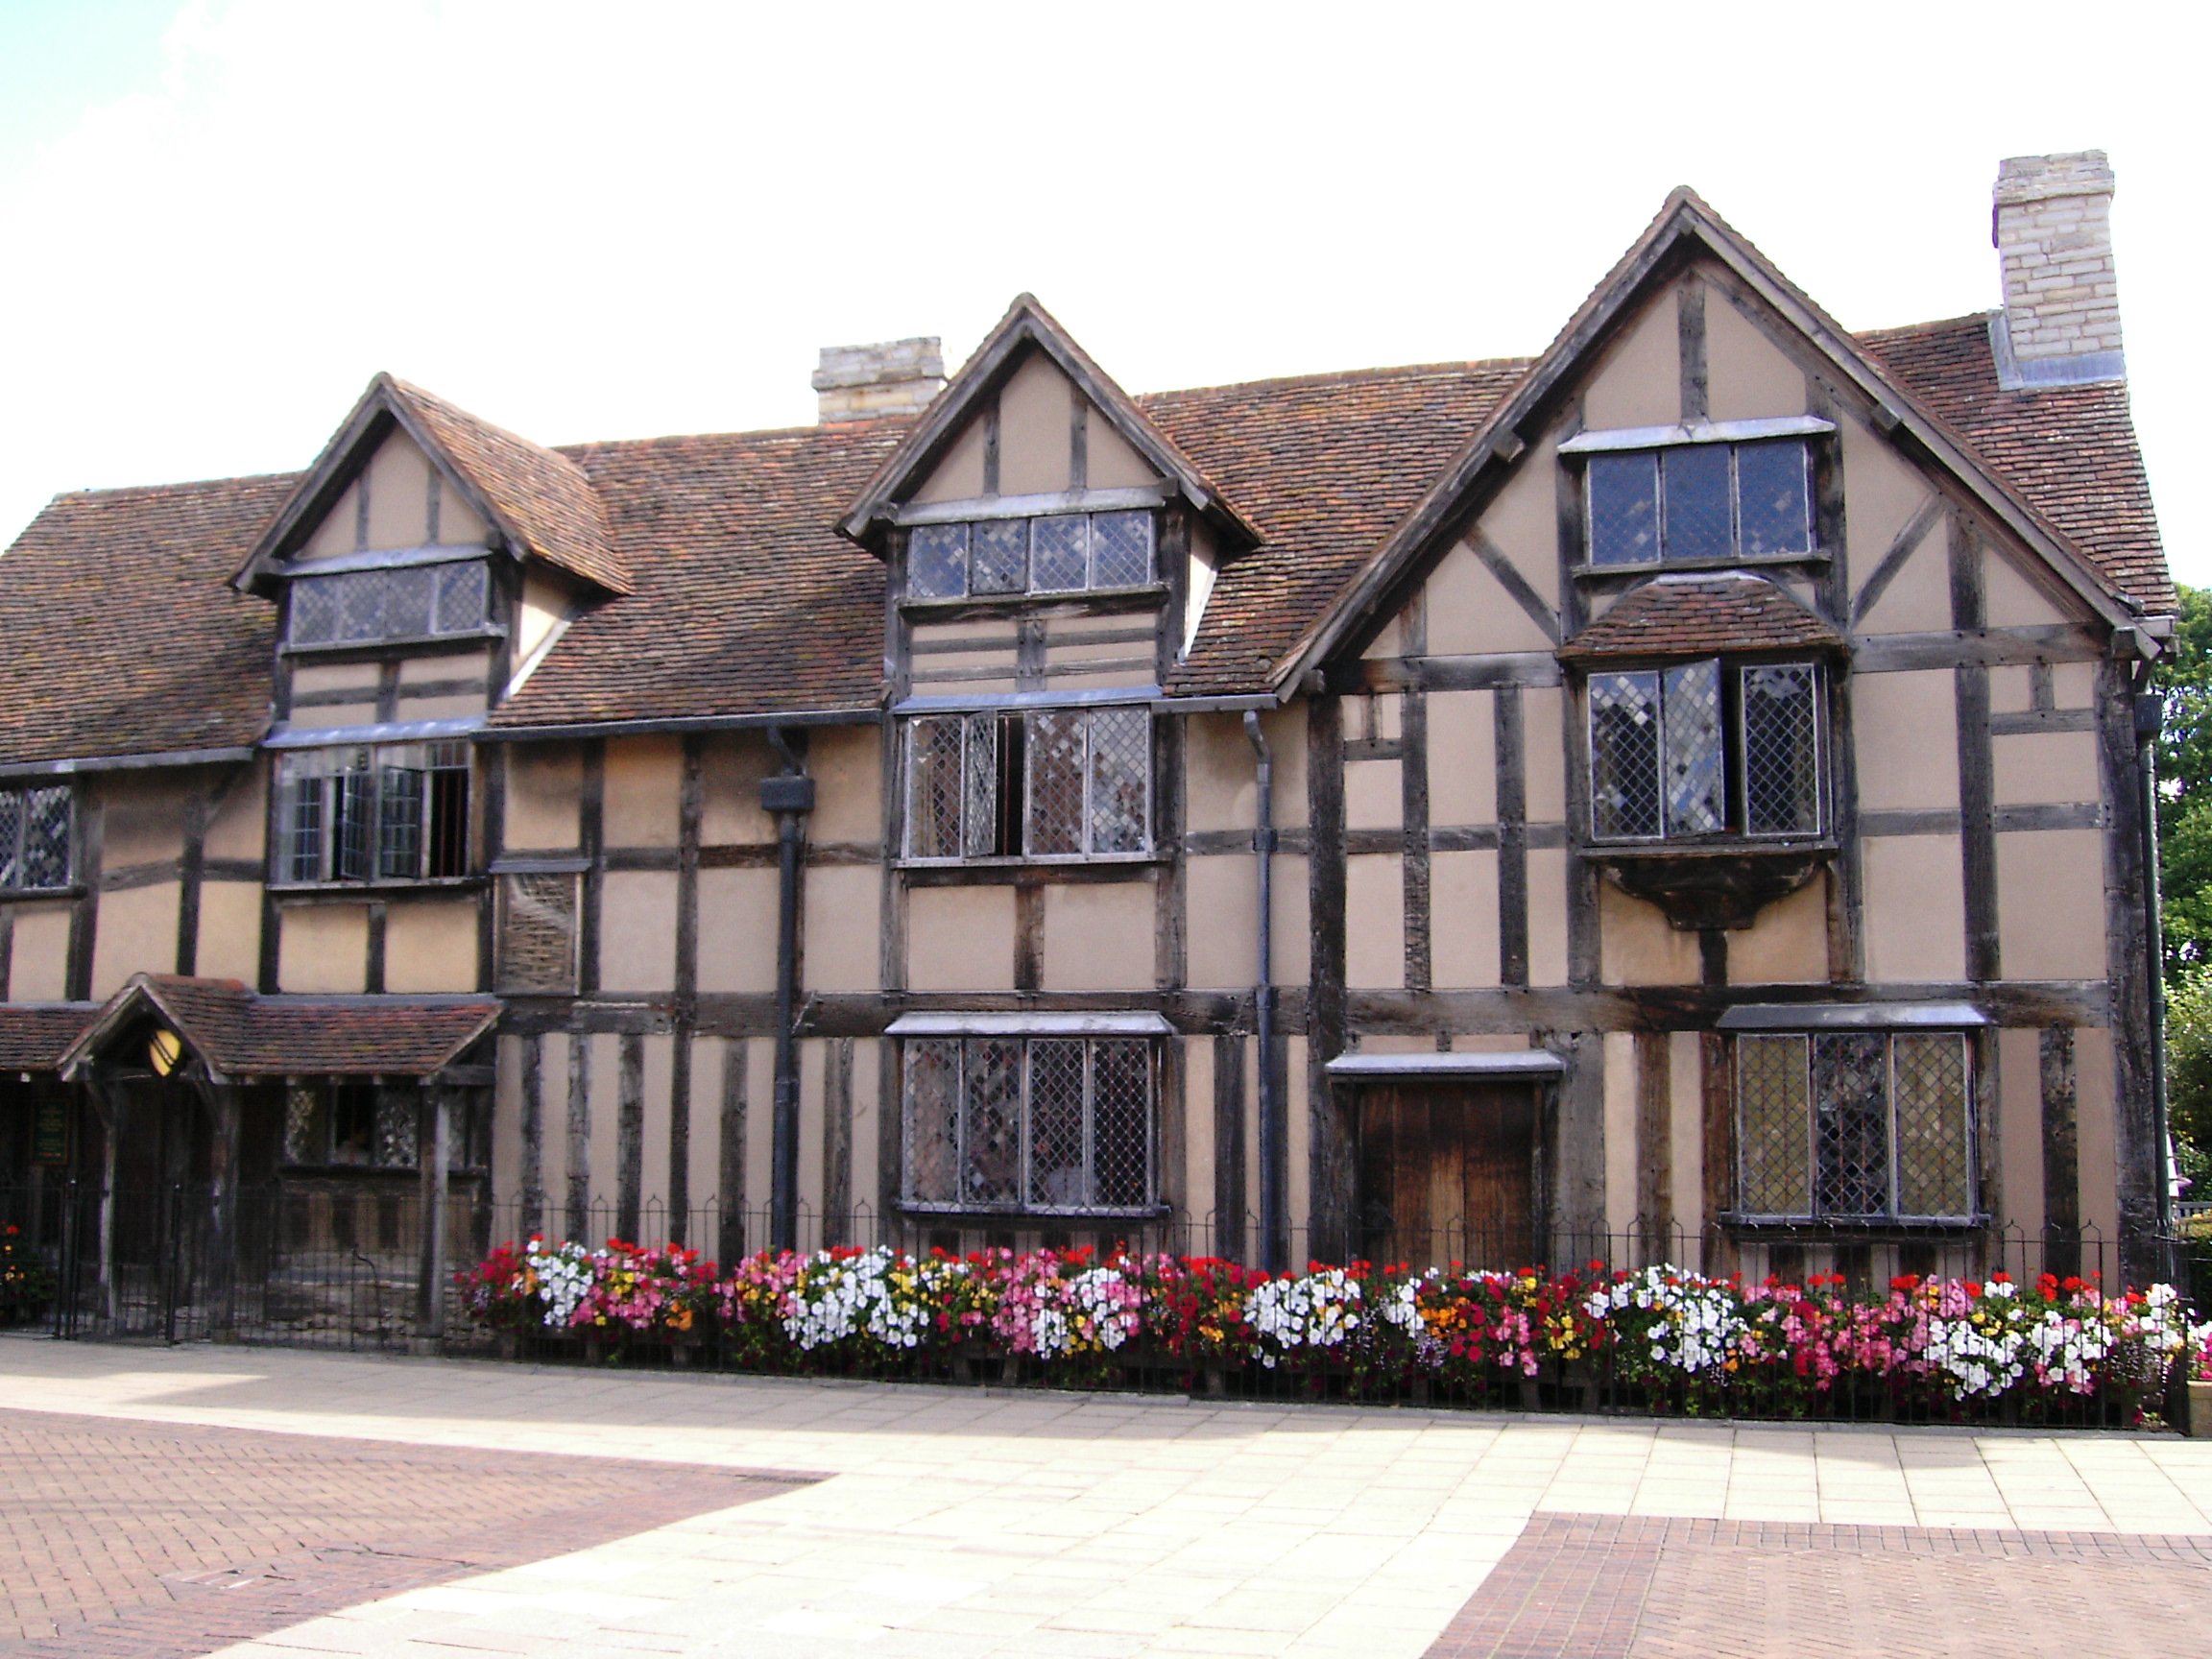 Shakespeare's Birthplace2 